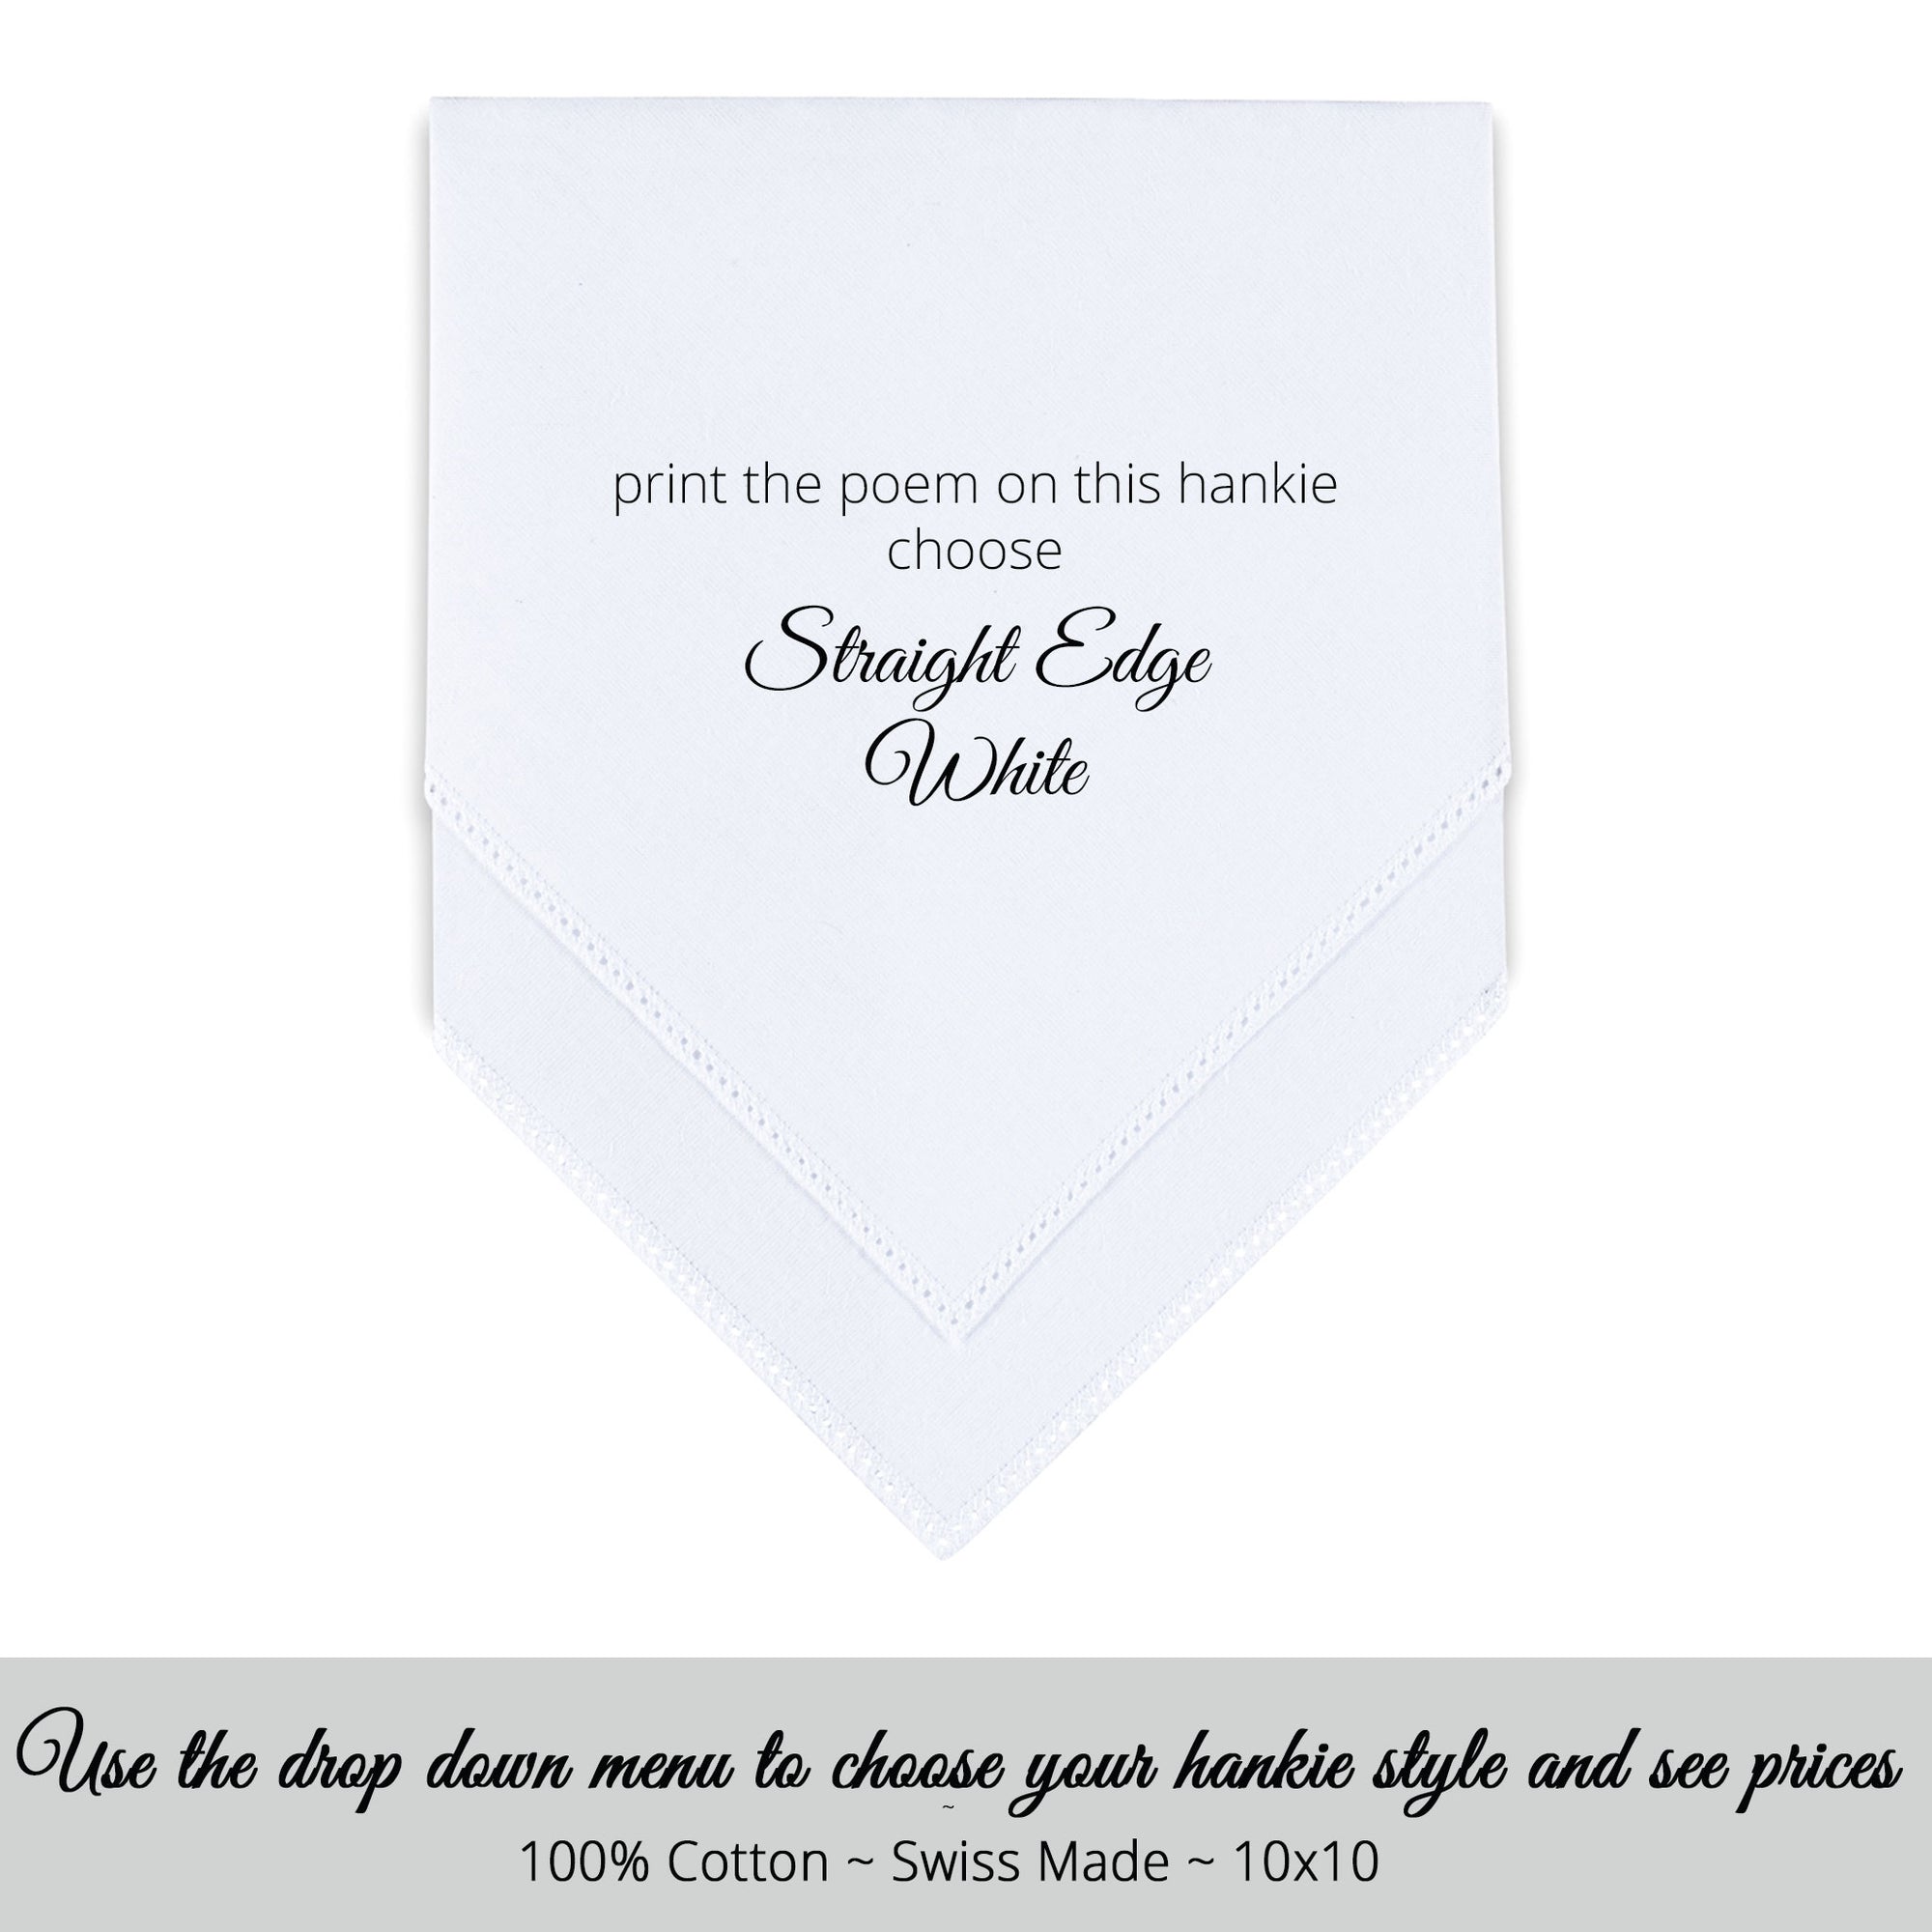 Straight edge white personalized wedding handkerchief for the stepmother of the bride